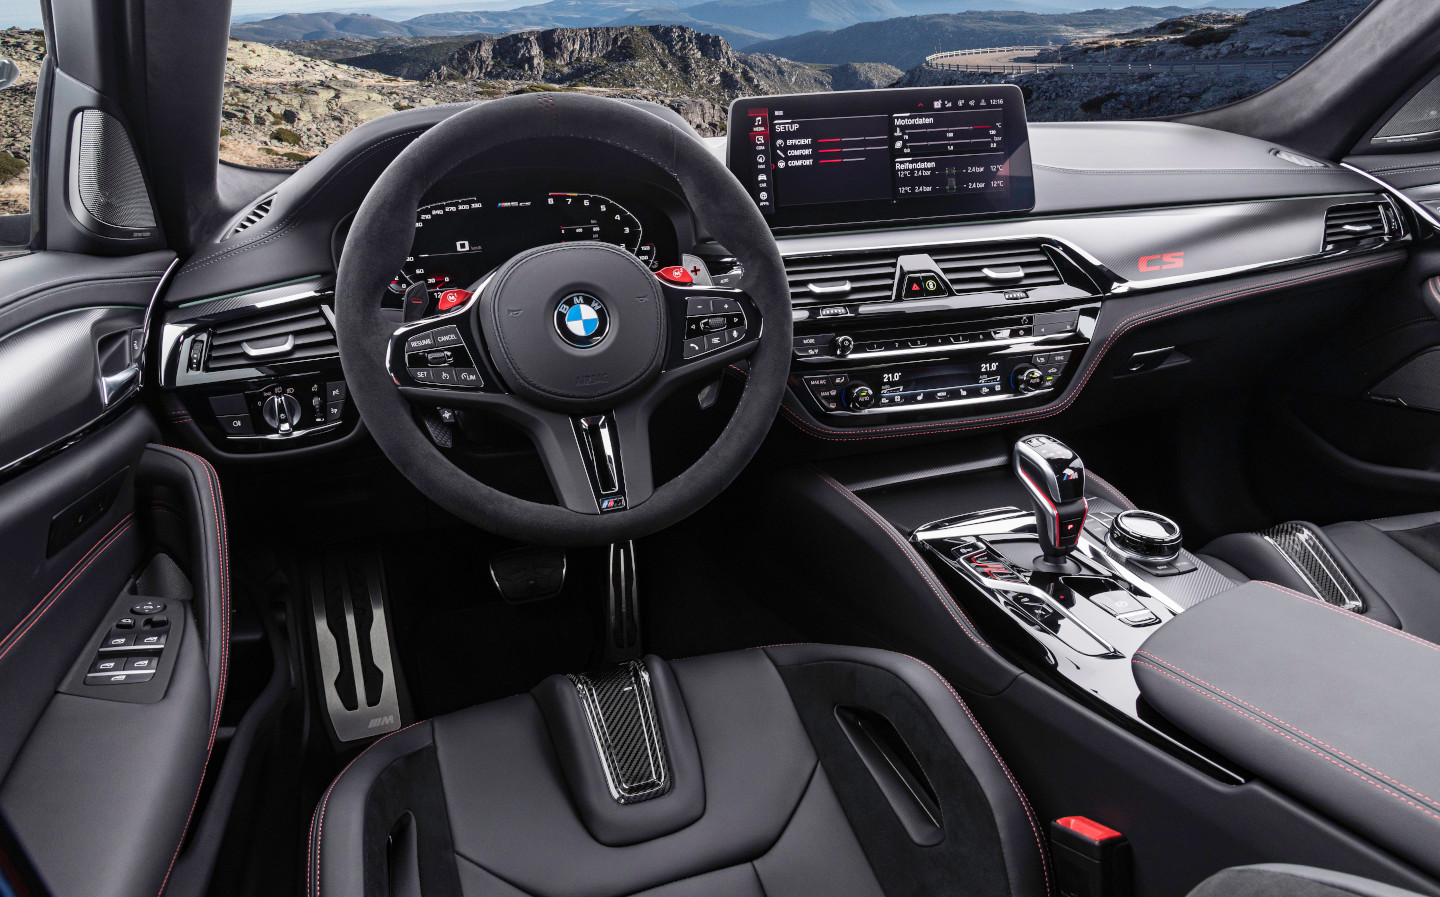 New 2022 BMW M5 CS: Most Powerful Production BMW Ever